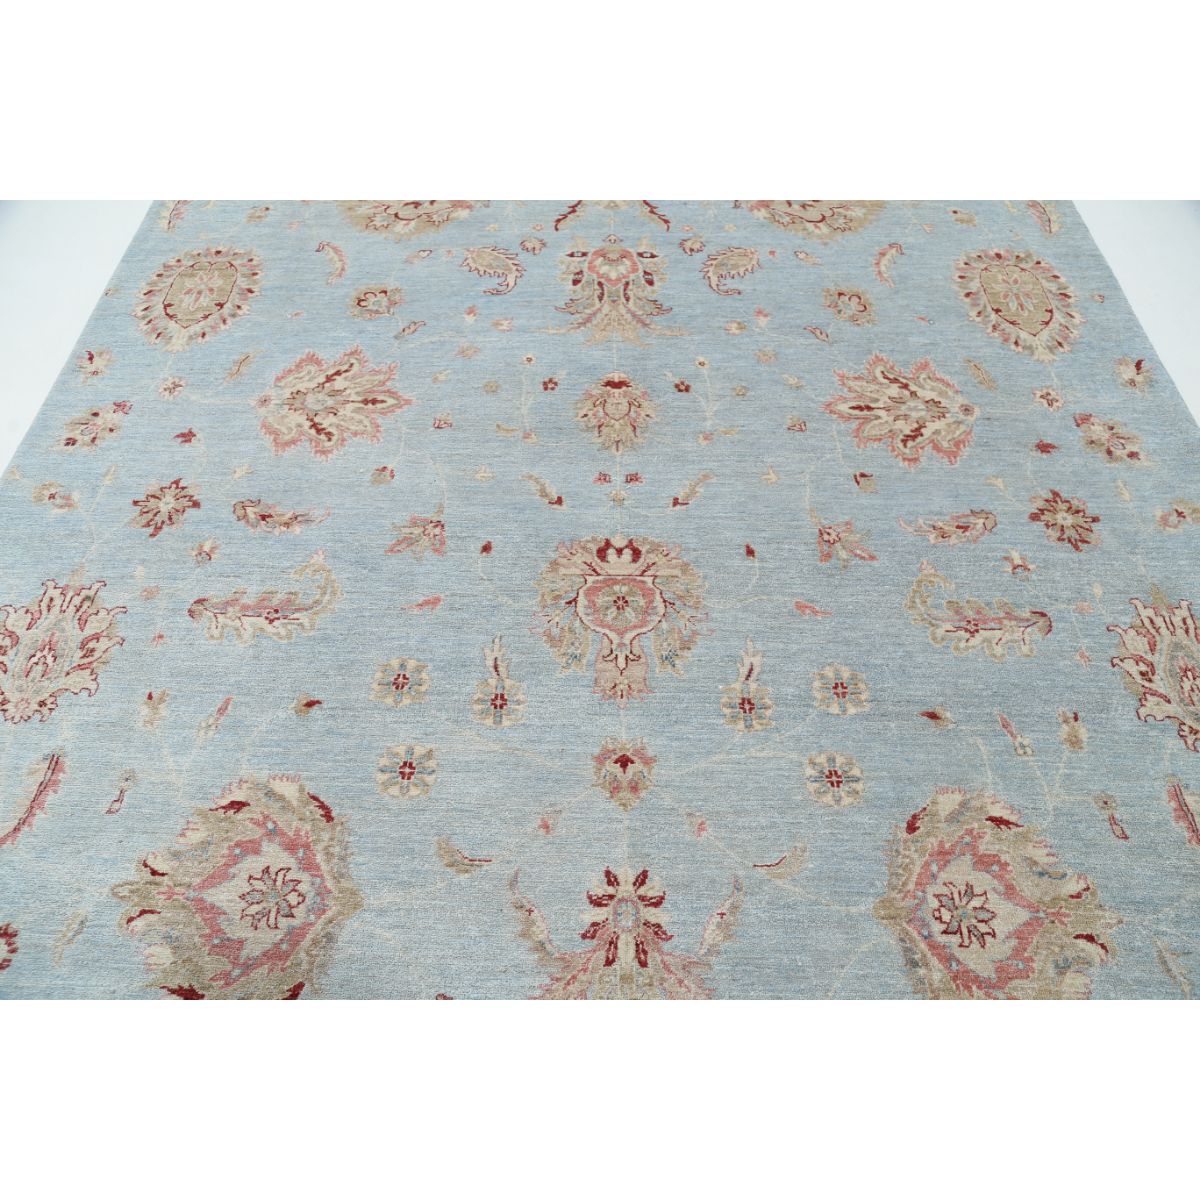 Artemix 7'11" X 10'3" Wool Hand-Knotted Rug